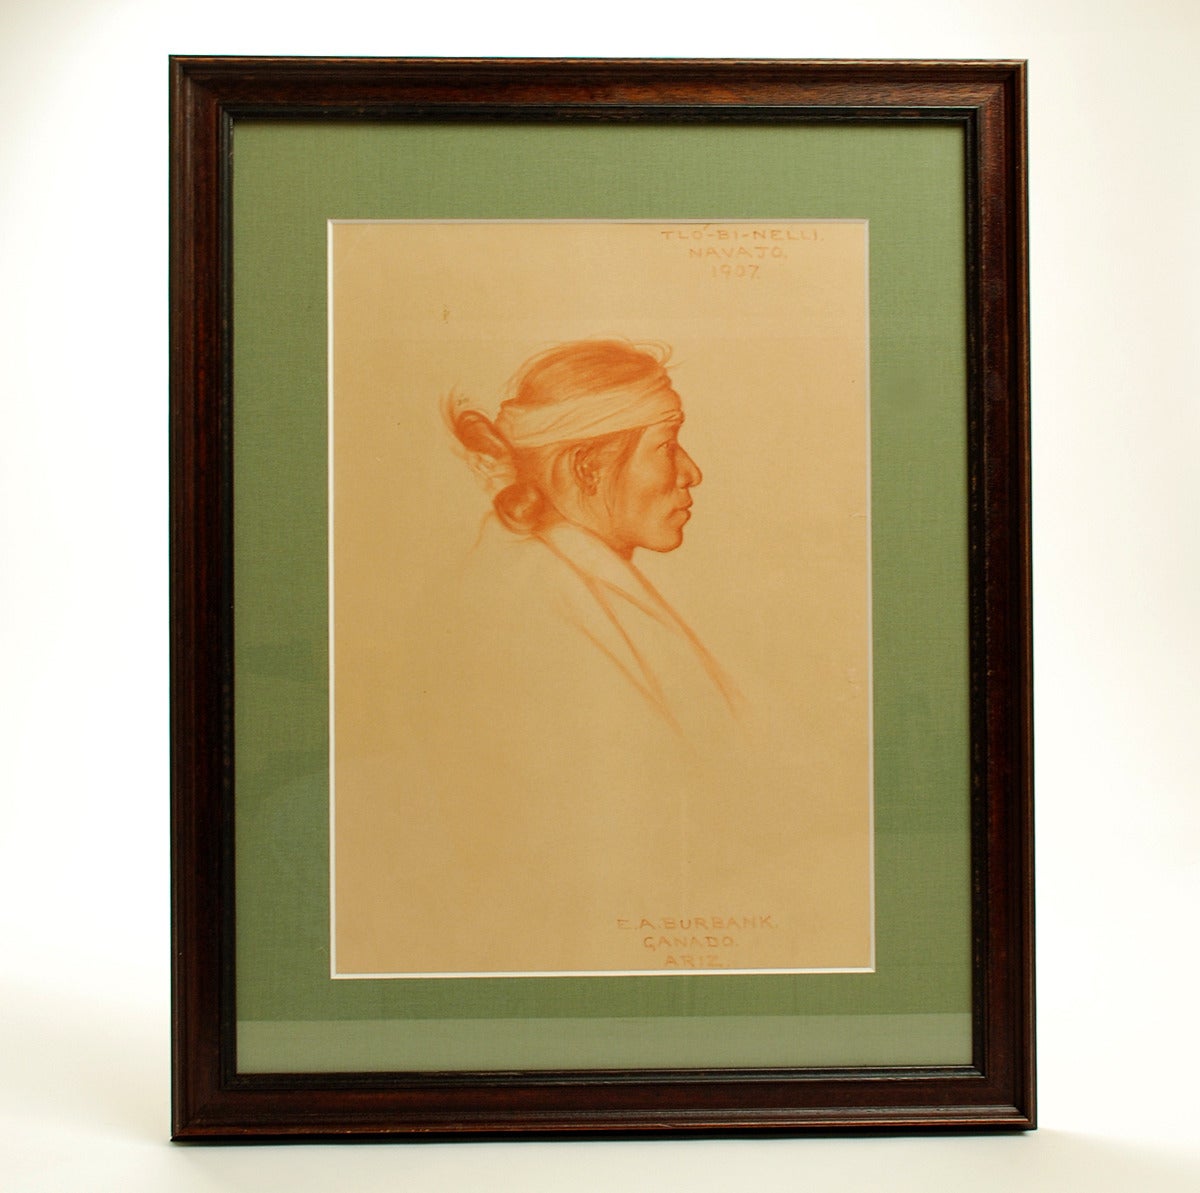 Rare original Conte crayon on paper of American Indian by well listed Taos and Santa Fe school painter Elbridge Ayer Burbank (1858-1949). Signed (lower right) and inscribed 'Tlo-Bi-Nelli / Navajo / 1907' / 'E.A. Burbank. Ganado,